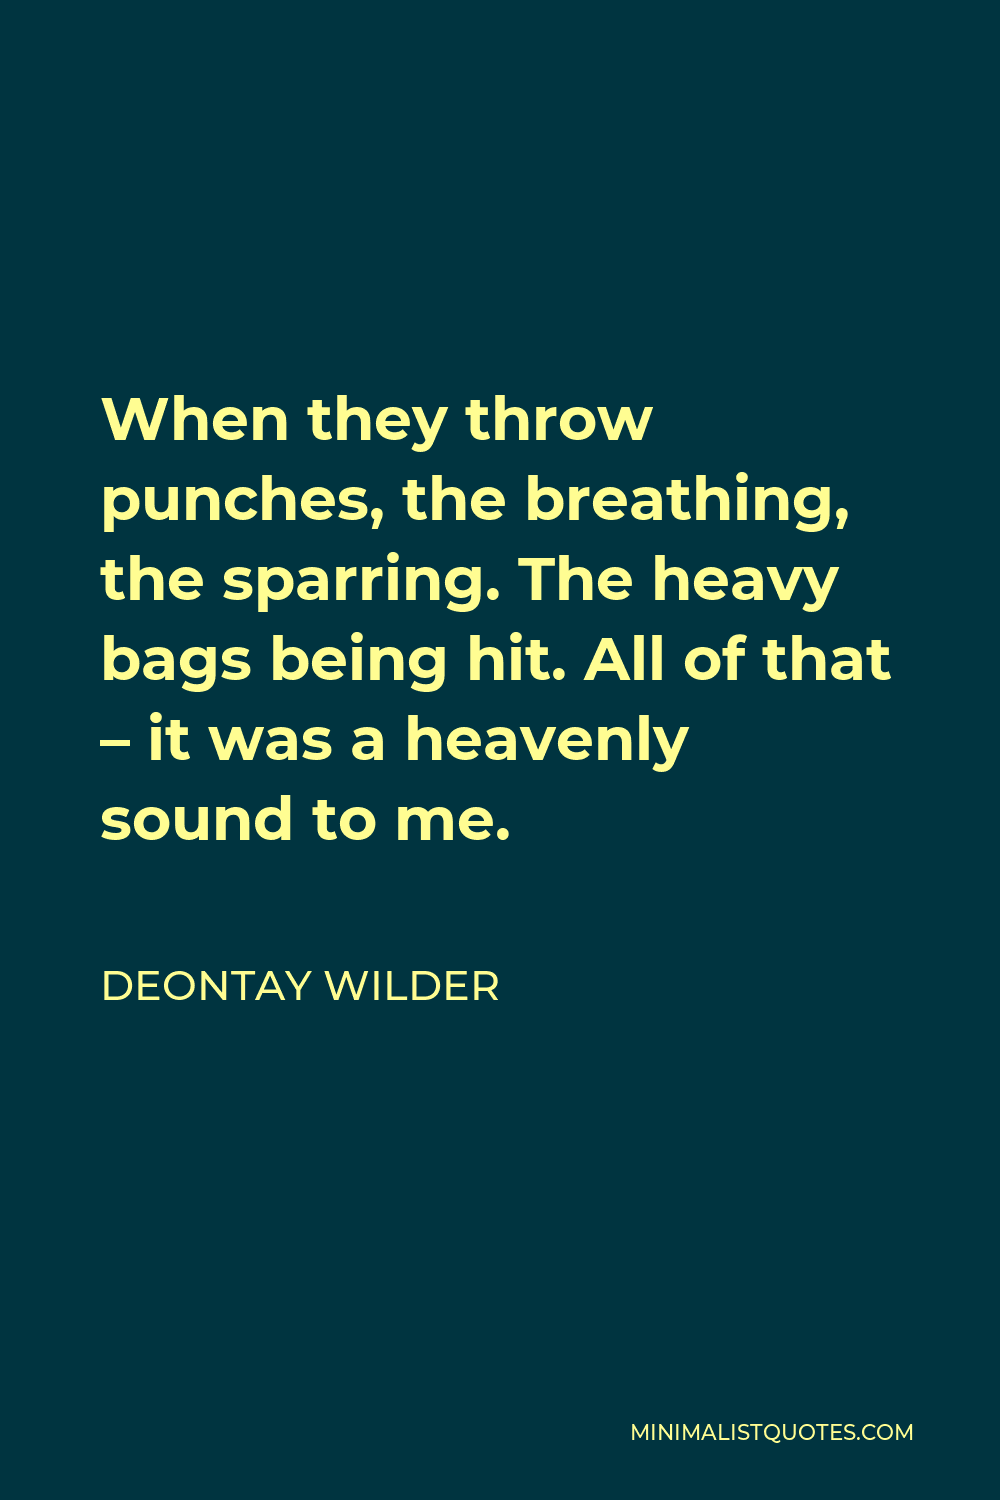 Deontay Wilder Quote - When they throw punches, the breathing, the sparring. The heavy bags being hit. All of that – it was a heavenly sound to me.